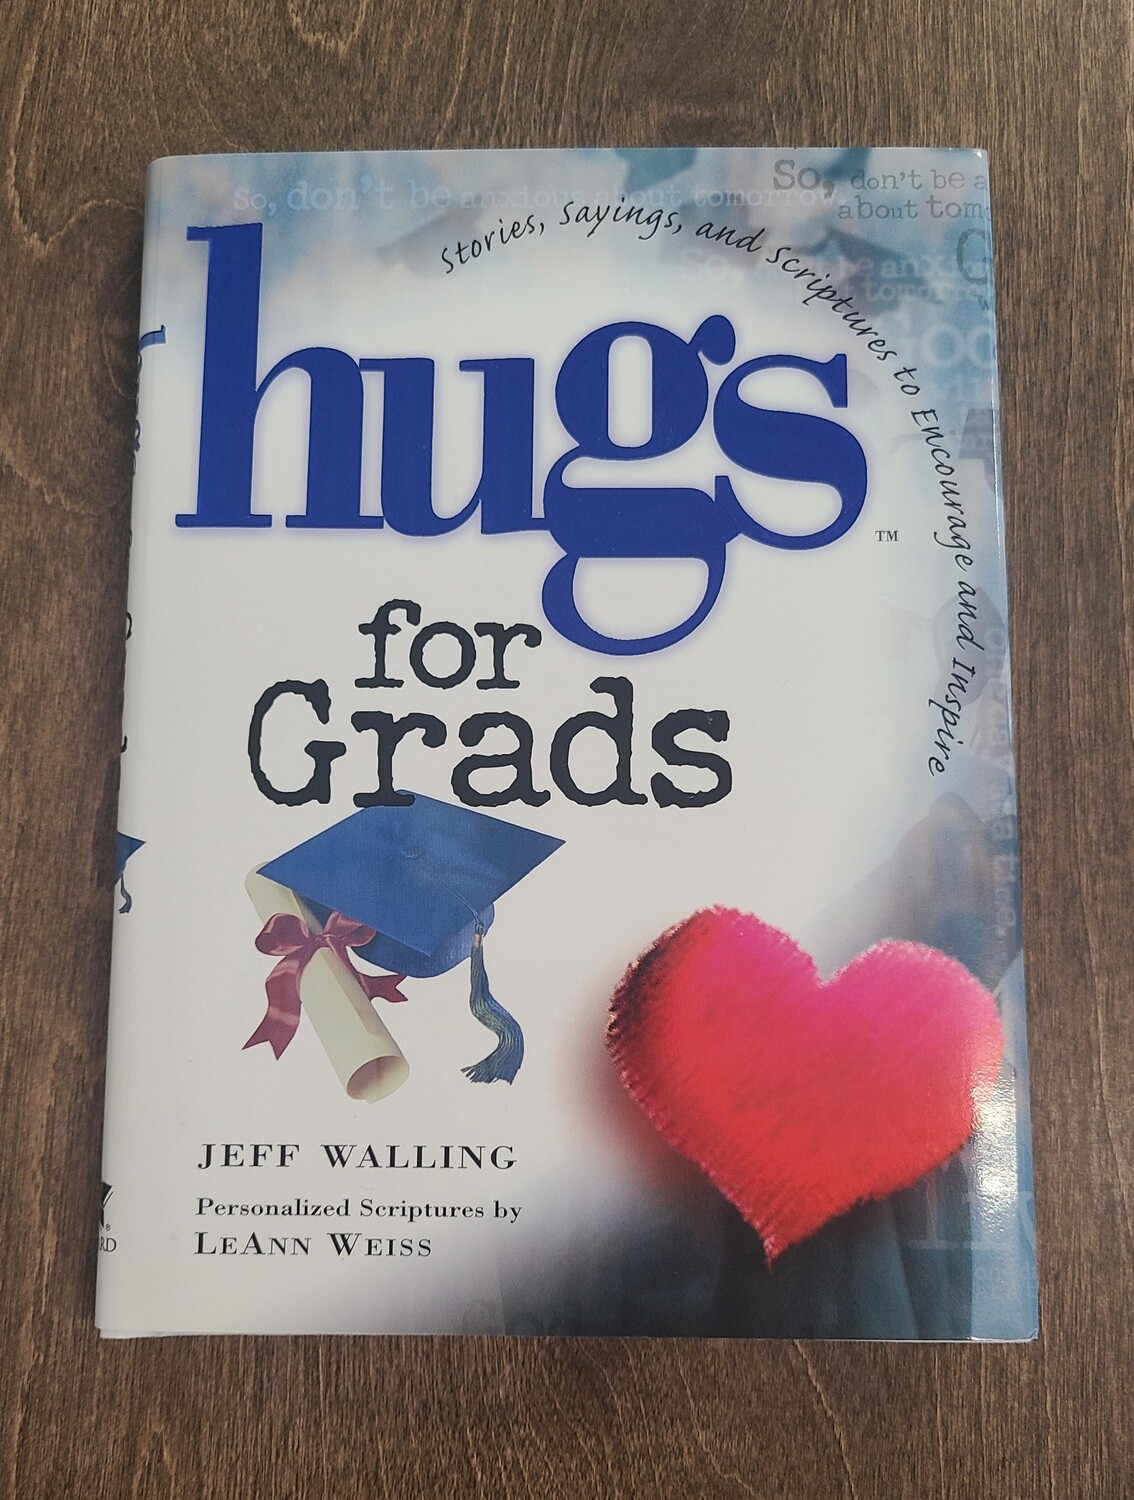 Hugs for Grads by Jeff Walling and LeAnn Weiss